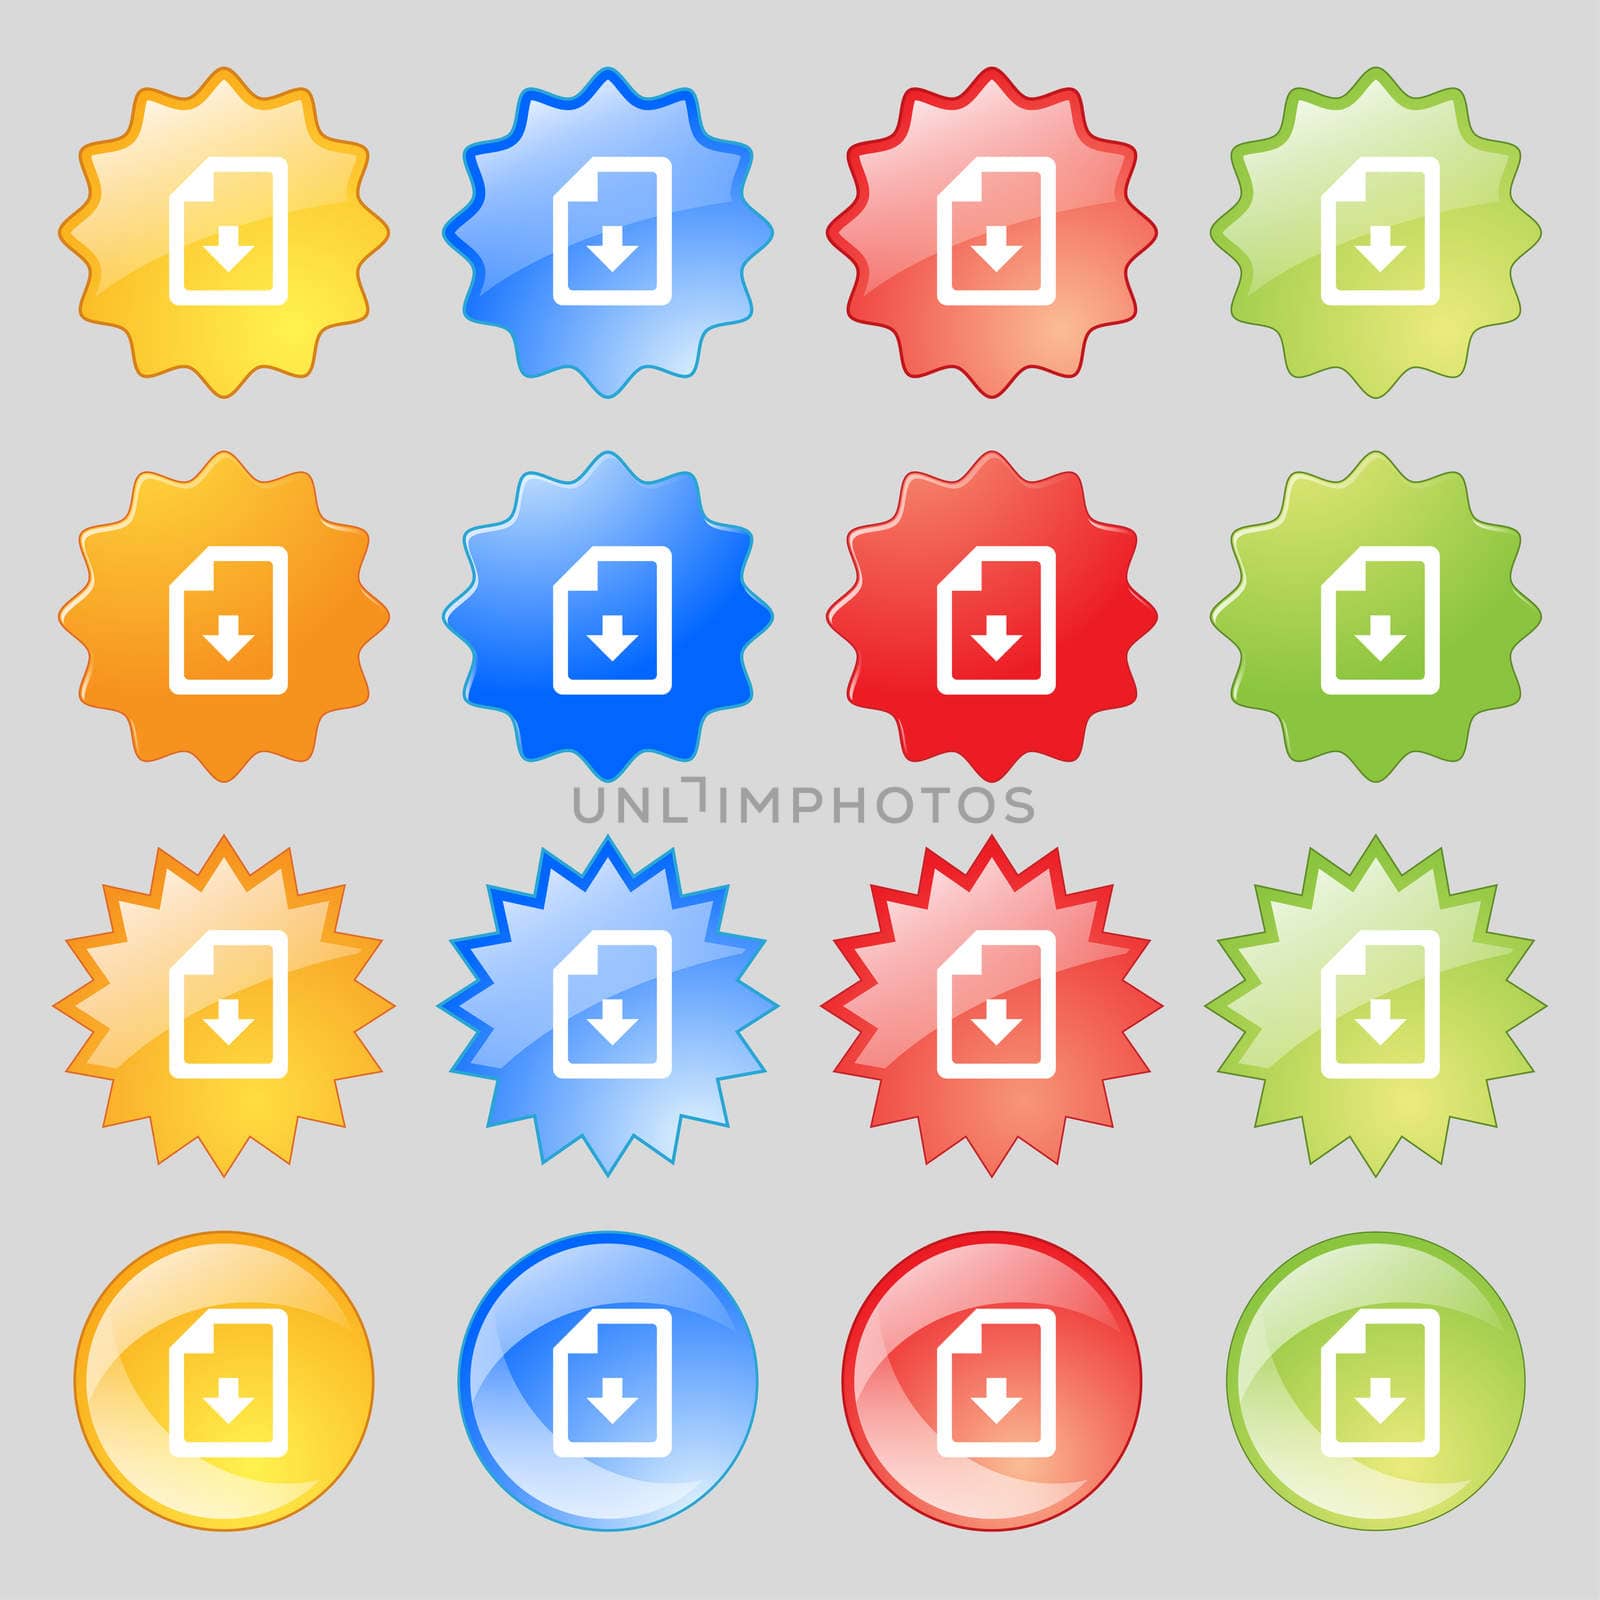 import, download file icon sign. Big set of 16 colorful modern buttons for your design.  by serhii_lohvyniuk